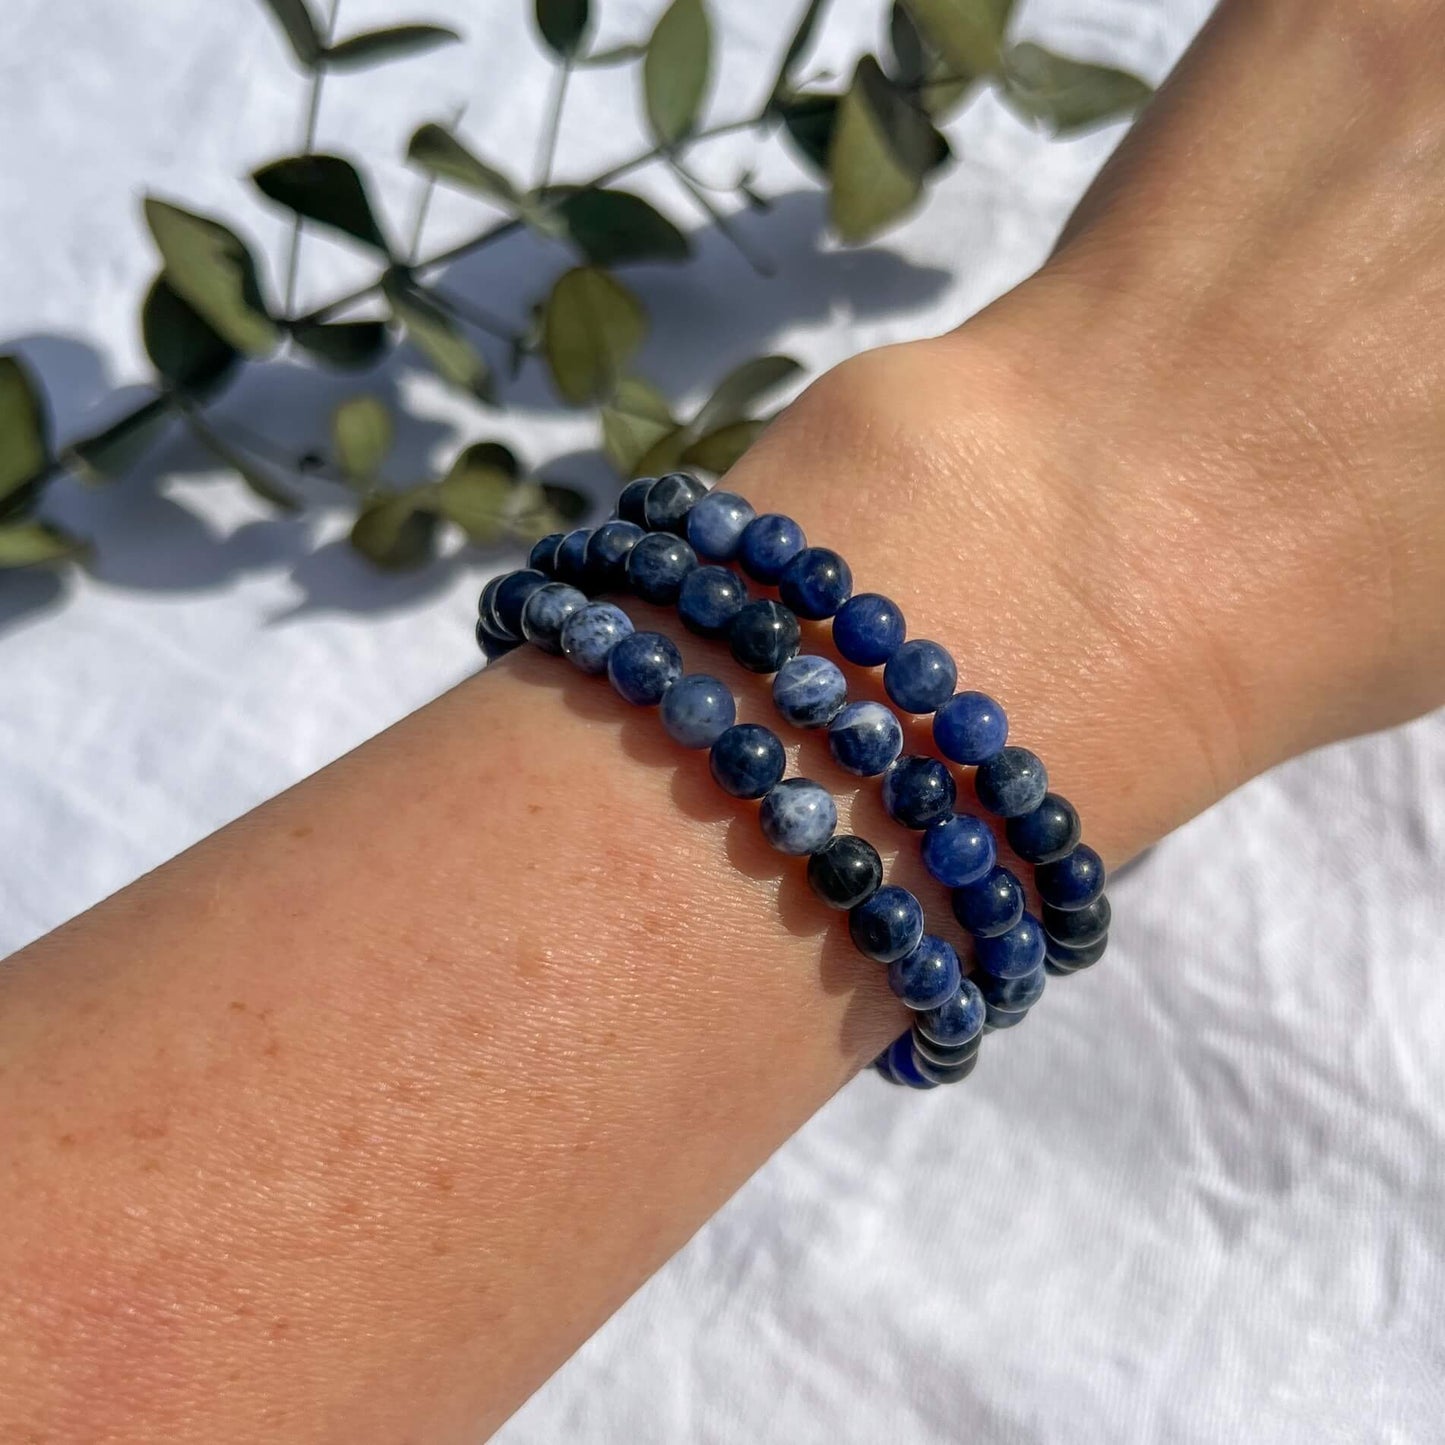 A woman's wrist wearing Three blue and white patterned Sodalite crystal bead bracelets